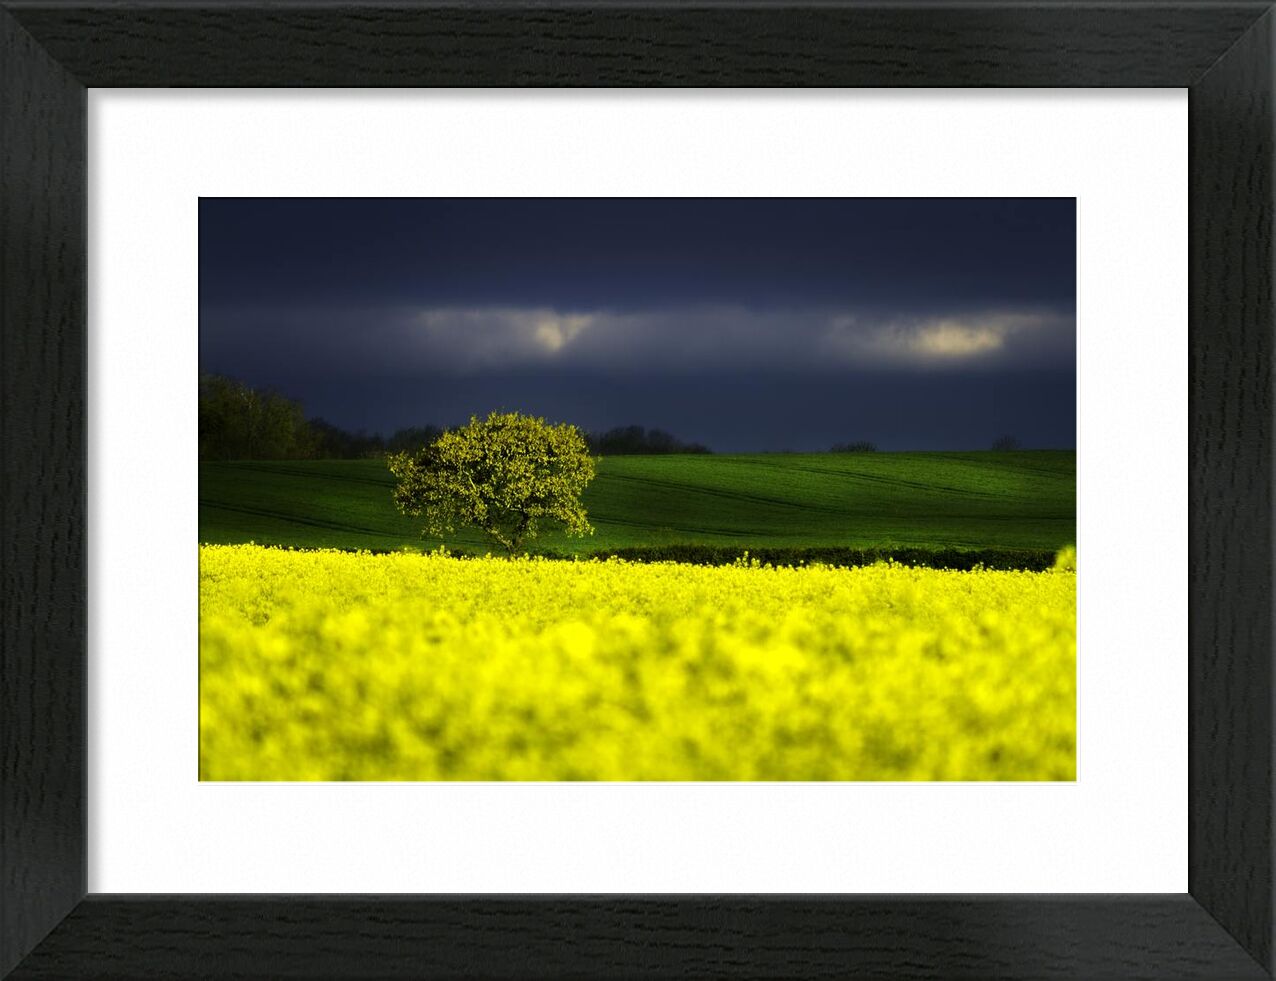 The yellow field from Pierre Gaultier, Prodi Art, vibrant, trees, sky, rural, rapeseed, outdoors, nature photography, nature, hills, grass, flowers, field, dark clouds, dark, countryside, country, cloudiness, clouds, agriculture